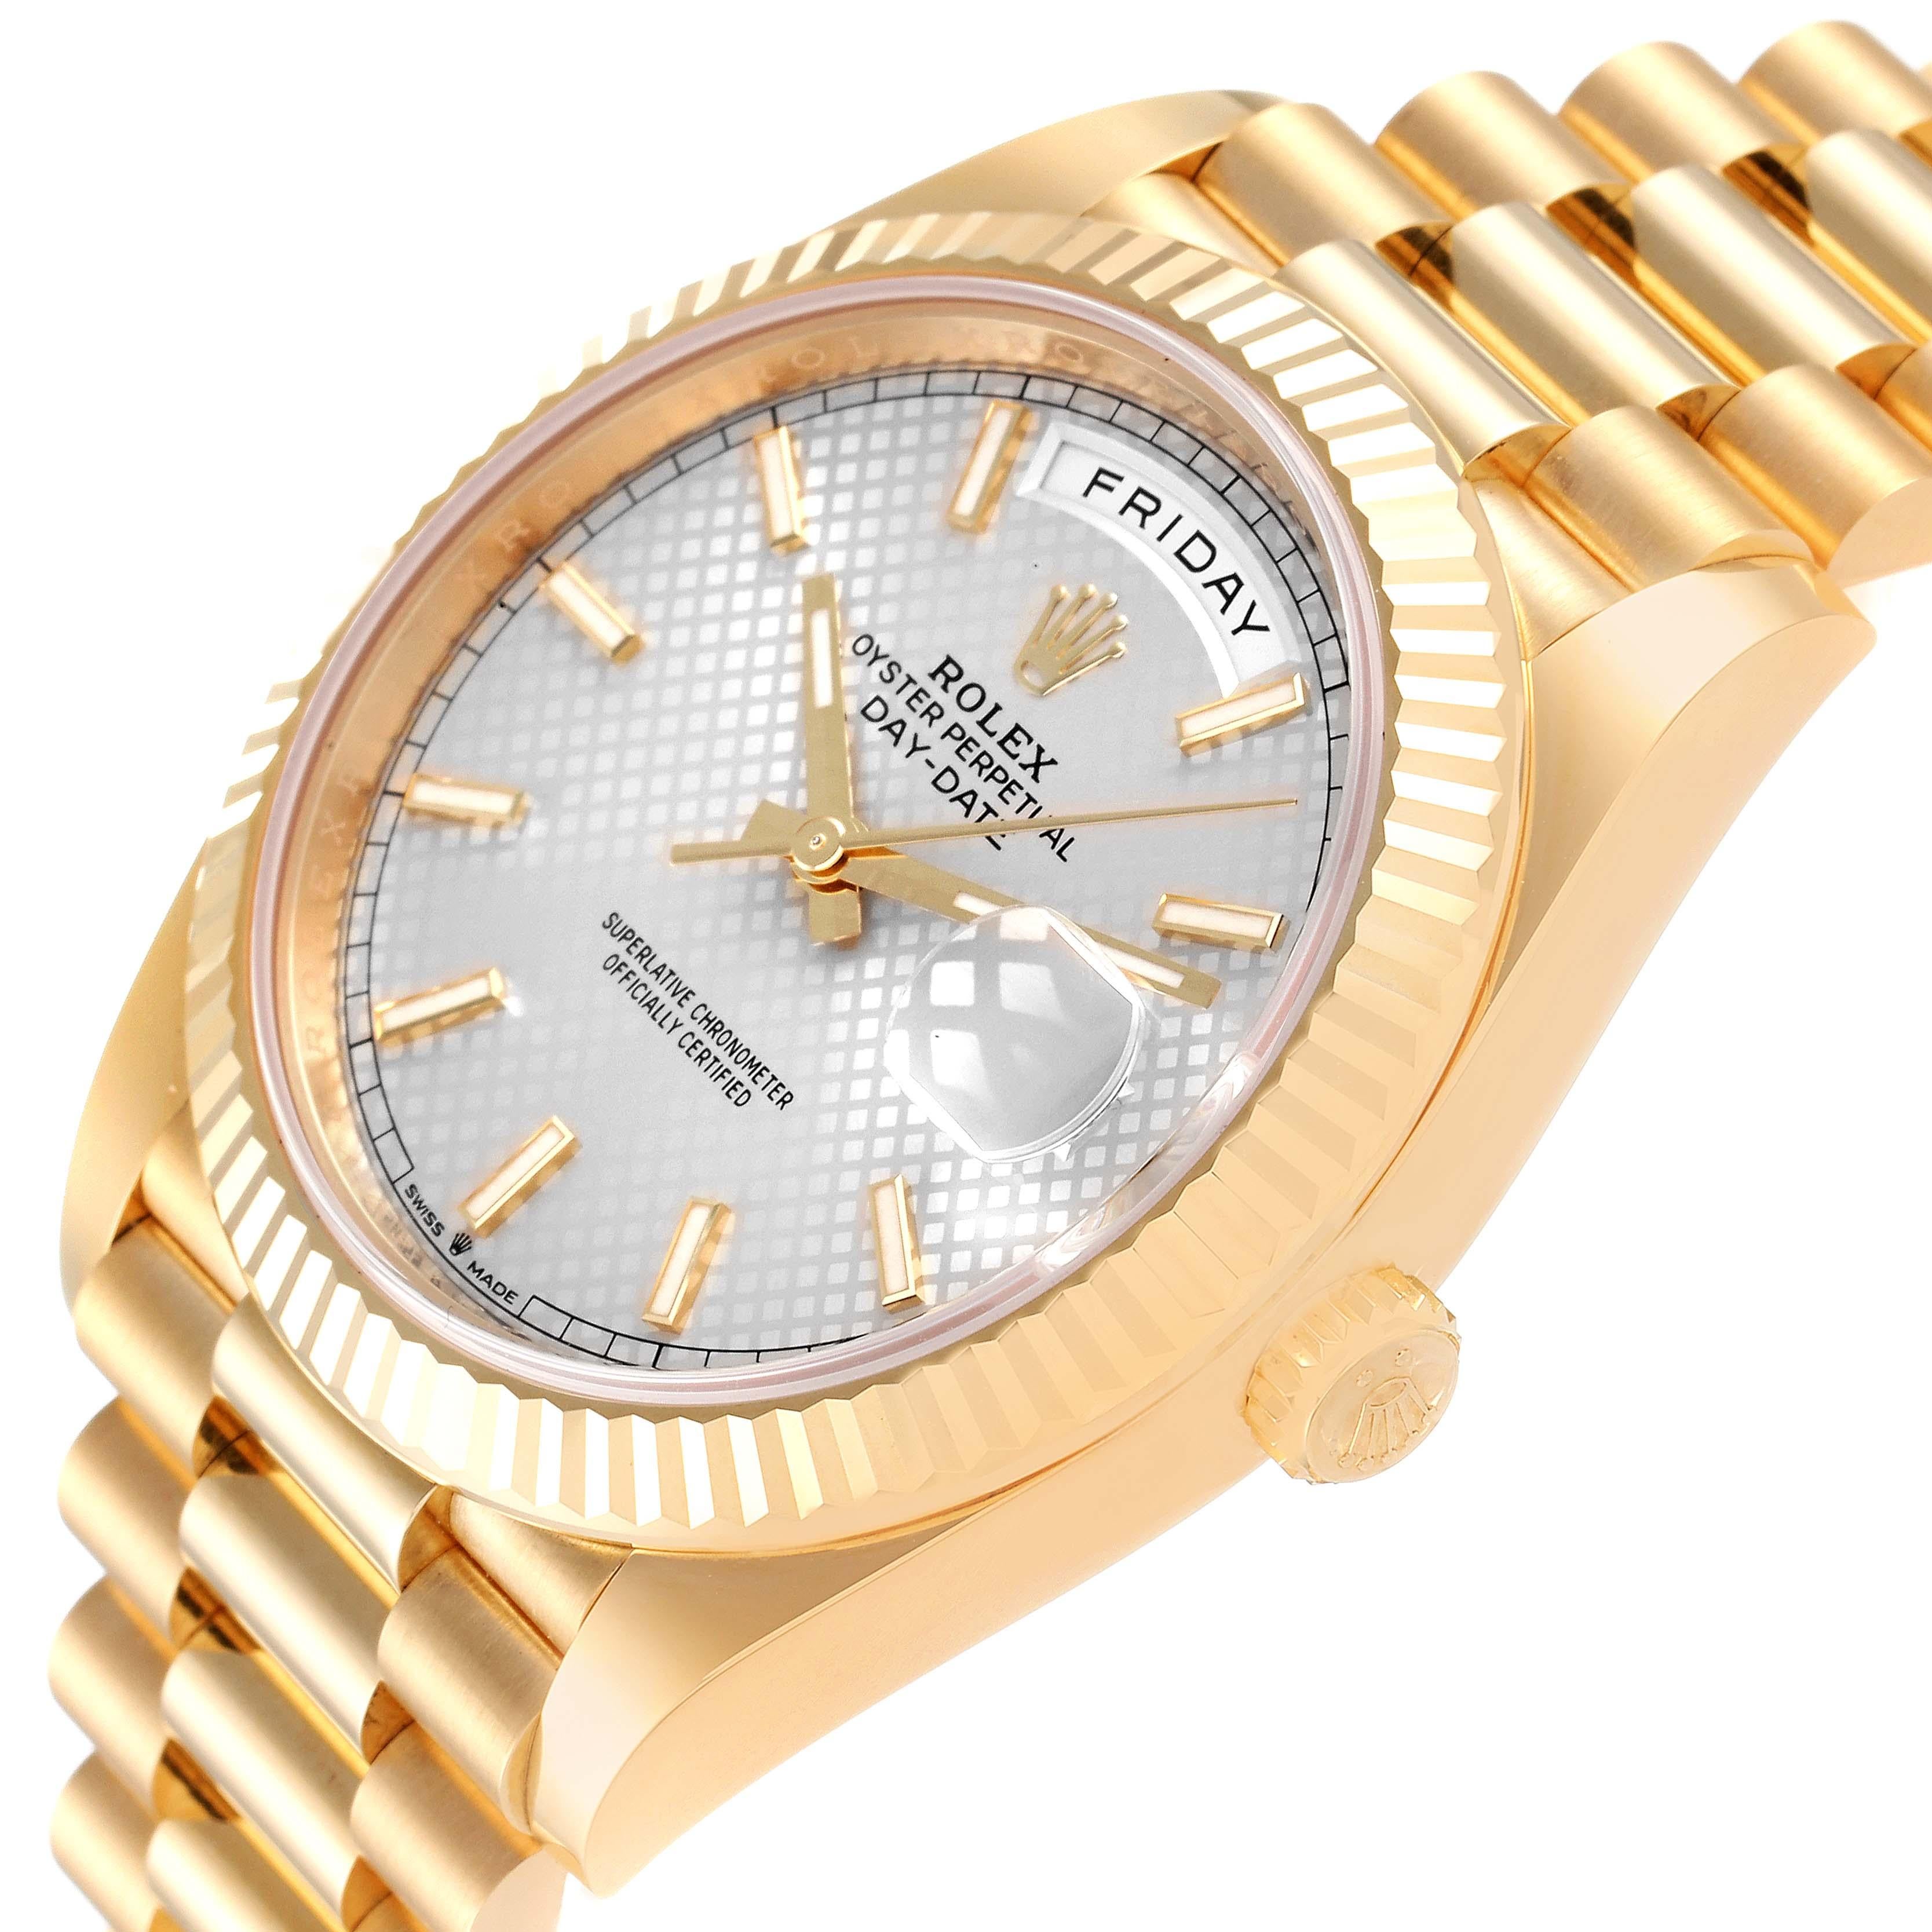 Rolex President Day-Date 18K Yellow Gold Mens Watch 228238 Unworn For Sale 2